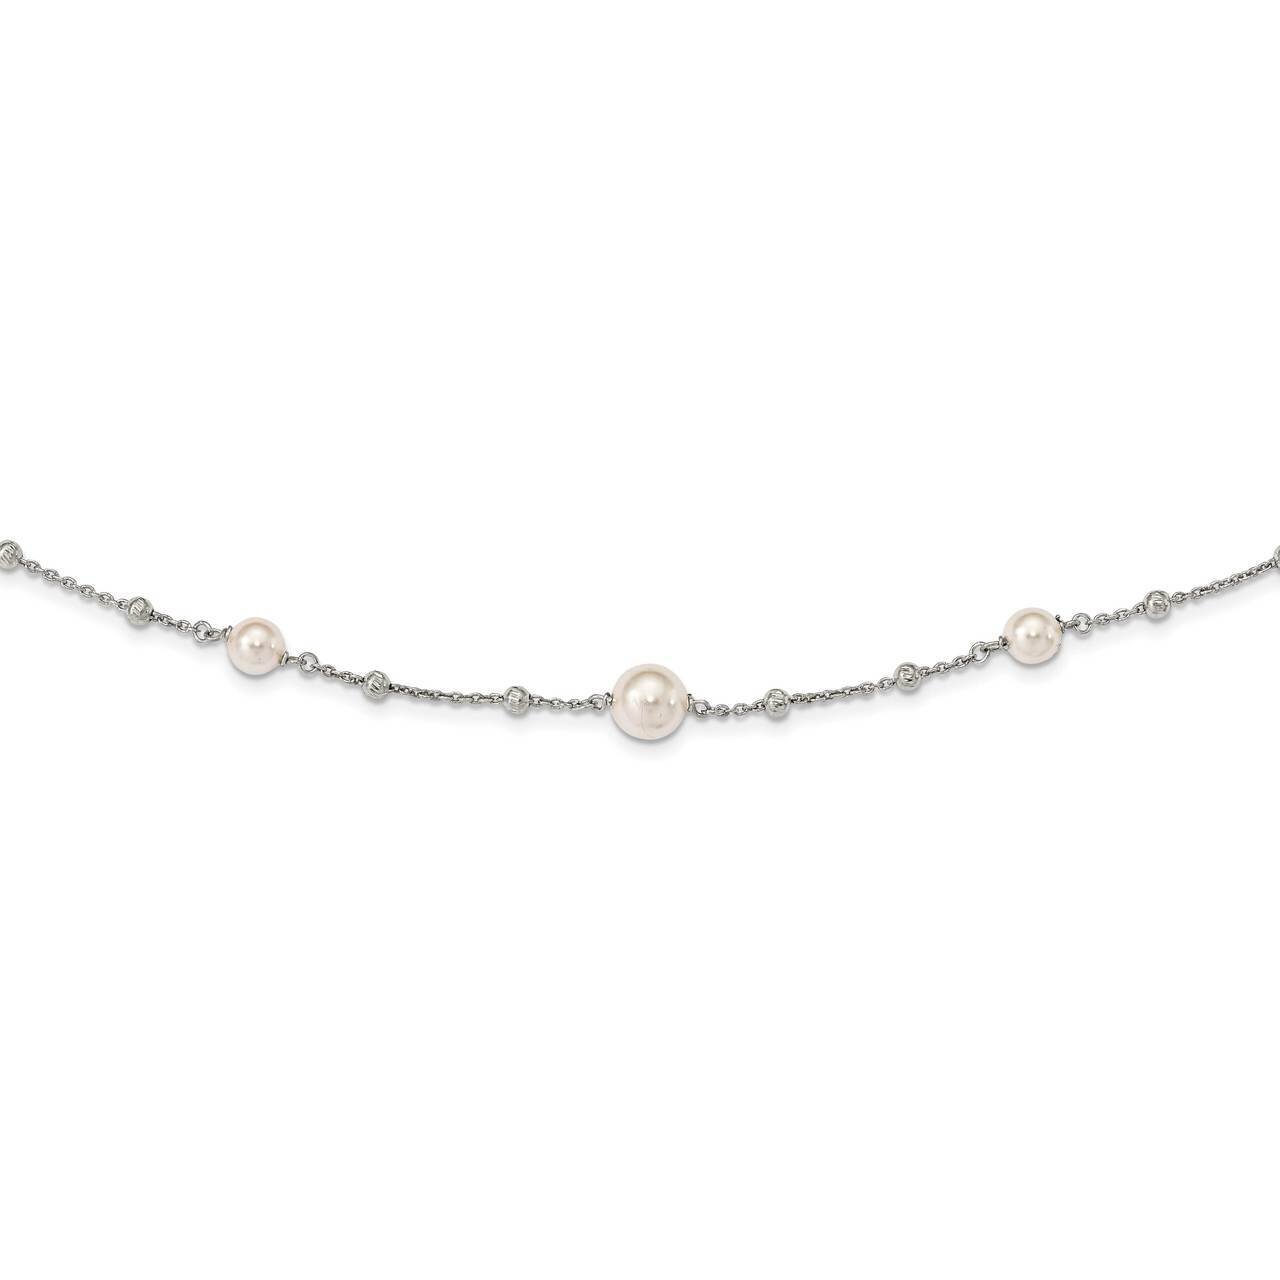 Beads & Swarovski Pearls with 1 inch Extender Necklace Sterling Silver Diamond-cut QG5314-28